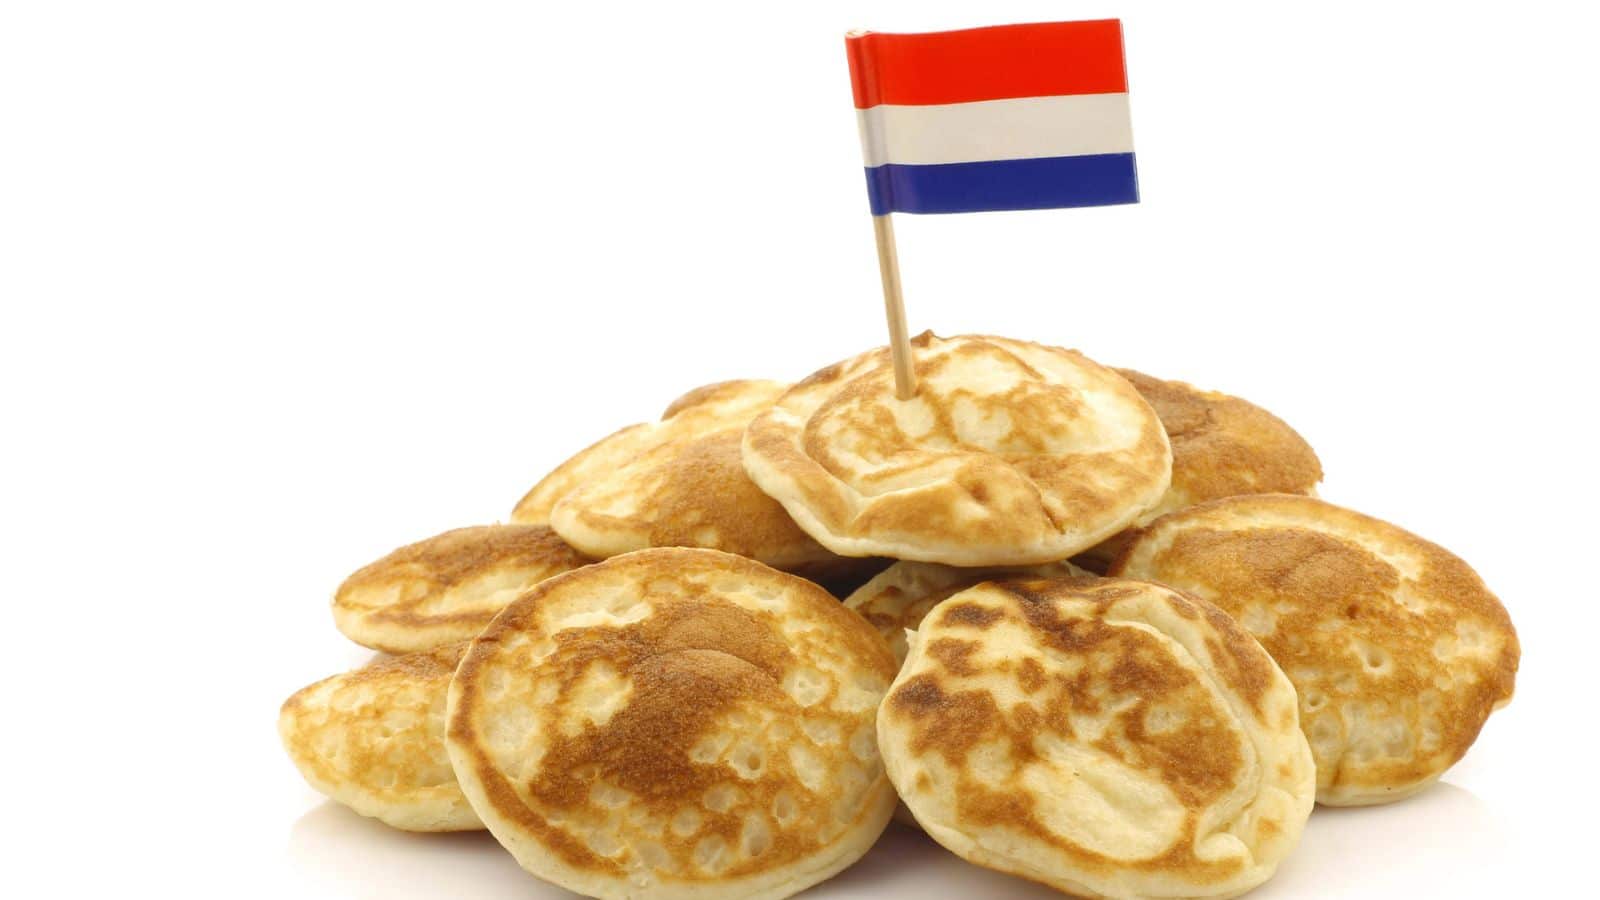 <p><span>Poffertjes are small, fluffy pancakes that are a beloved snack in the Netherlands. They’re often served with powdered sugar and melted butter, making them a sweet and indulgent treat. You can find poffertjes at street markets or food trucks throughout the country.</span></p><p><span>Poffertjes aren’t just a treat; they’re a warm, comforting hug on a chilly Dutch day. They evoke a sense of nostalgia, a return to simpler times when the joy of biting into a fluffy, sugary pancake could make any worry fade away. </span></p>